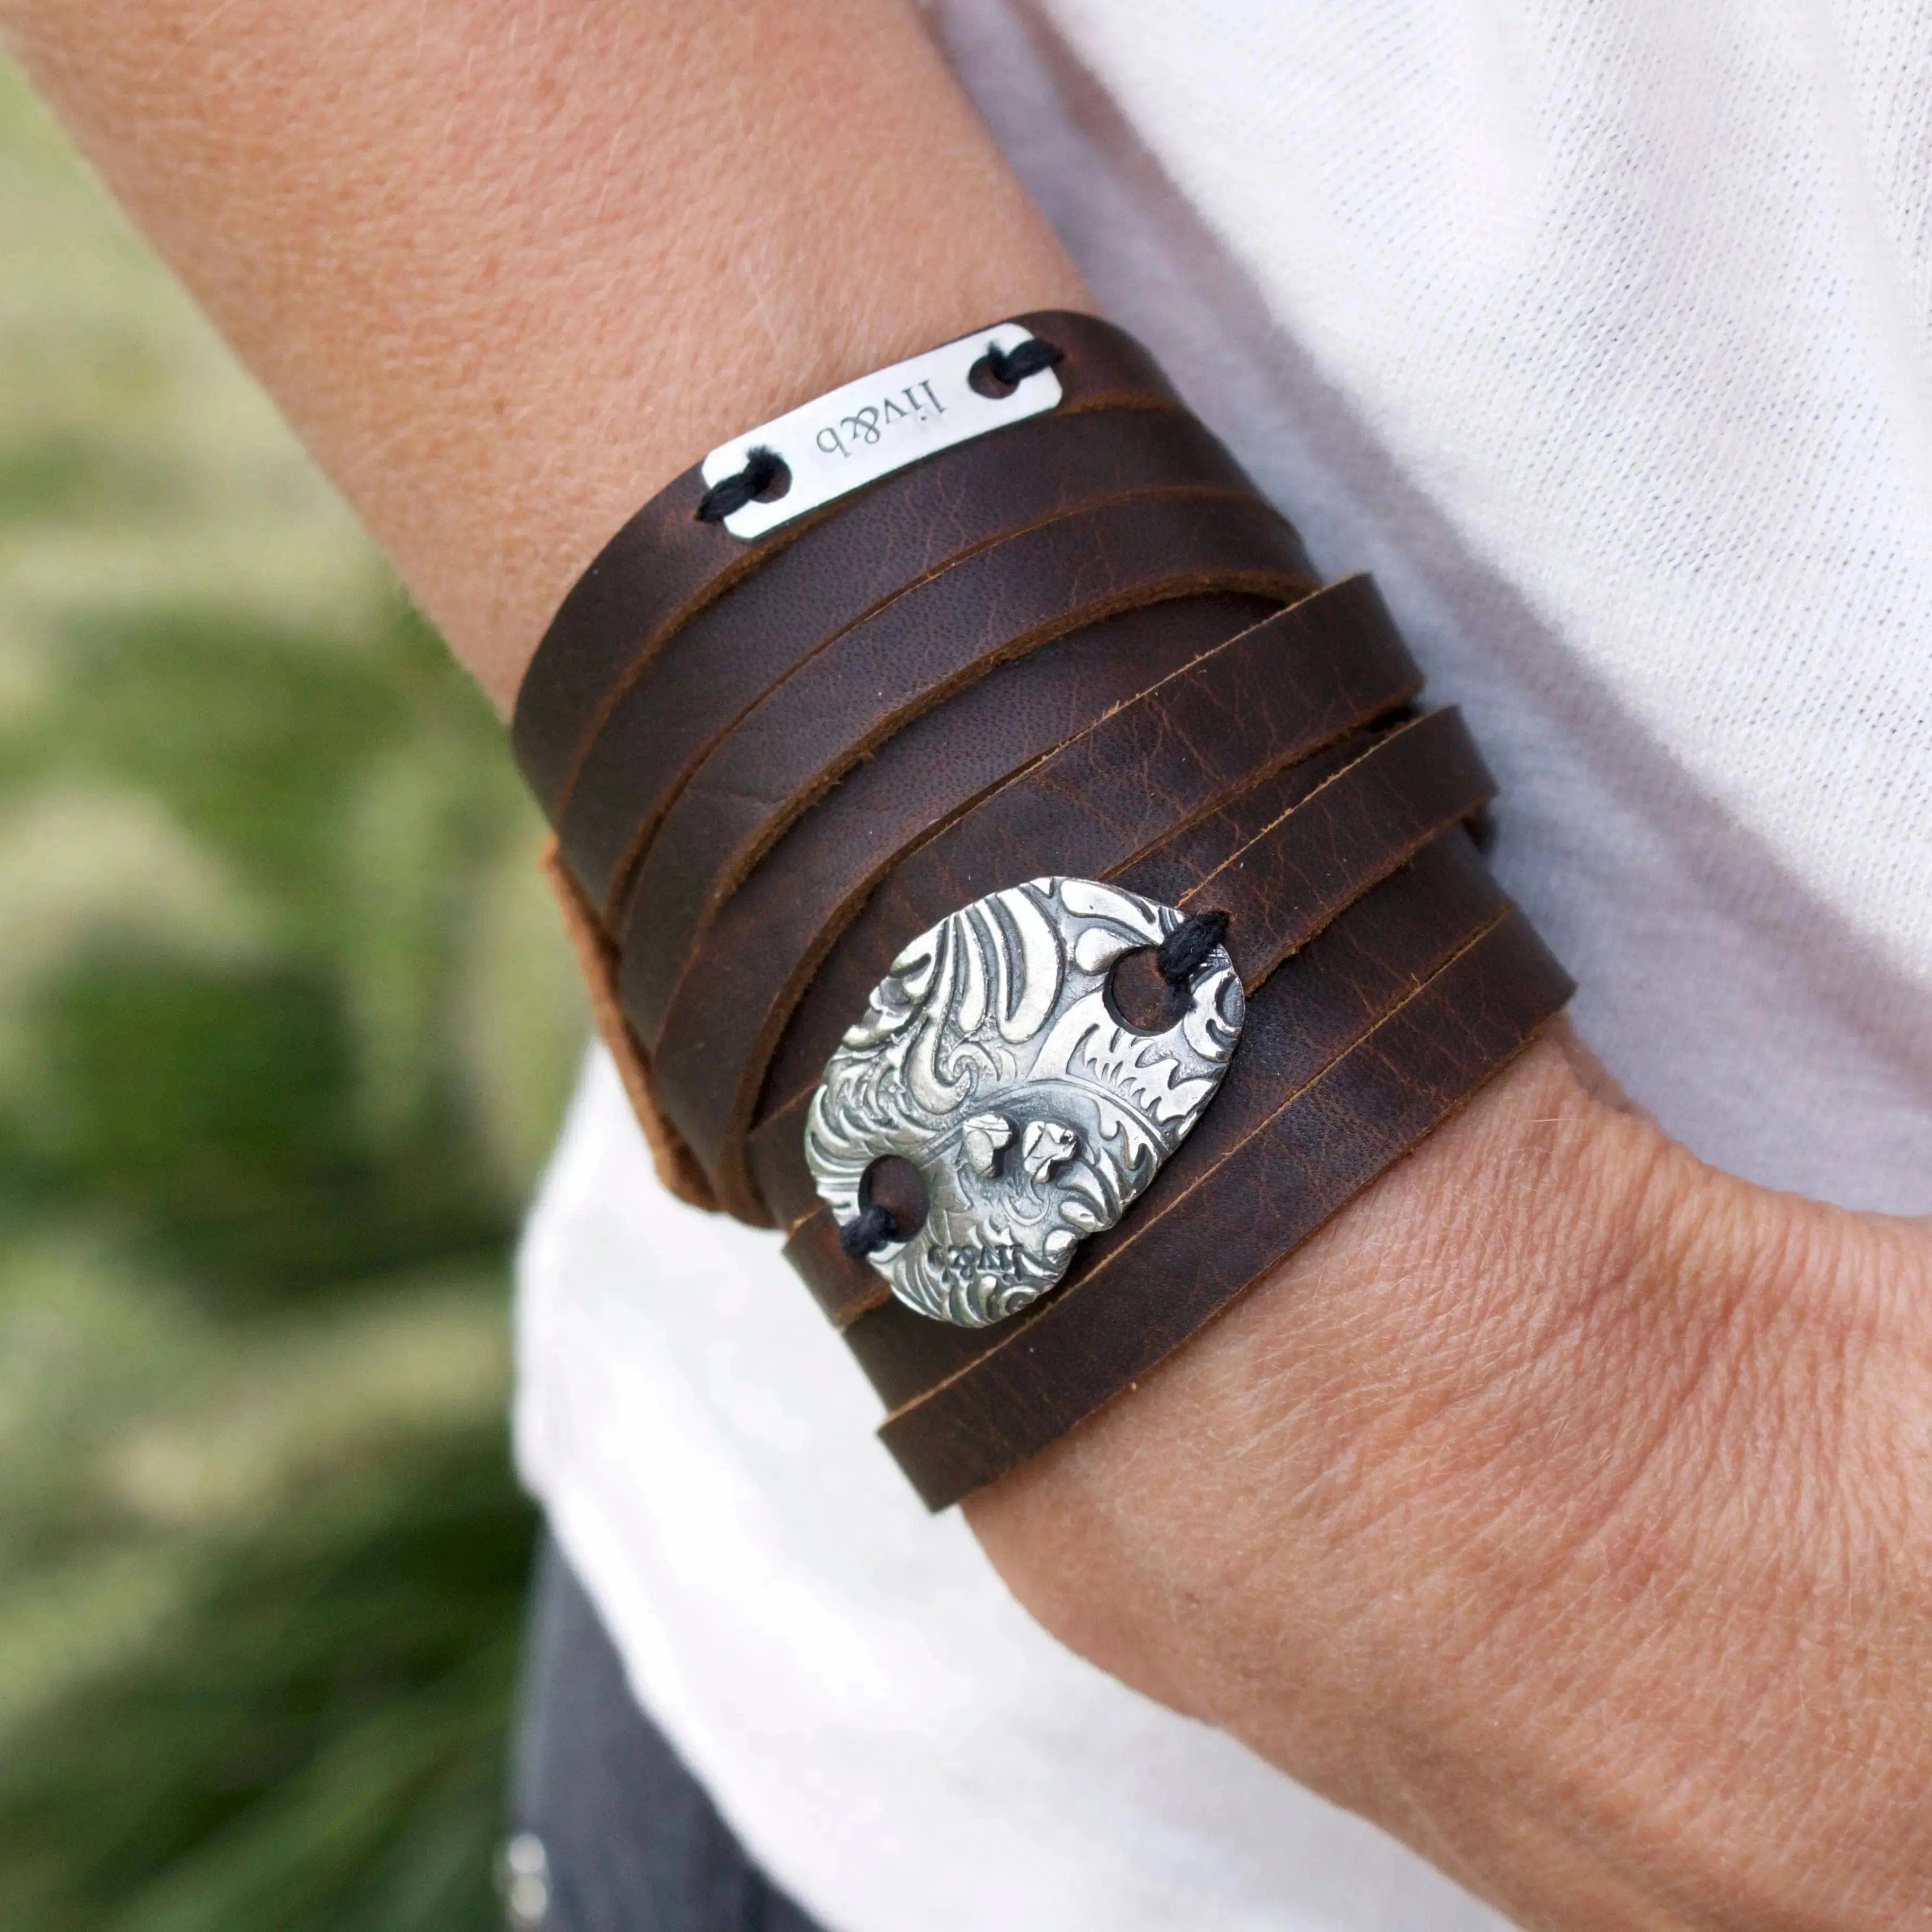 Buy Streetsoul Tribal Metal Design Leather Bracelet Wrist Band Gift For  Men. at Amazon.in